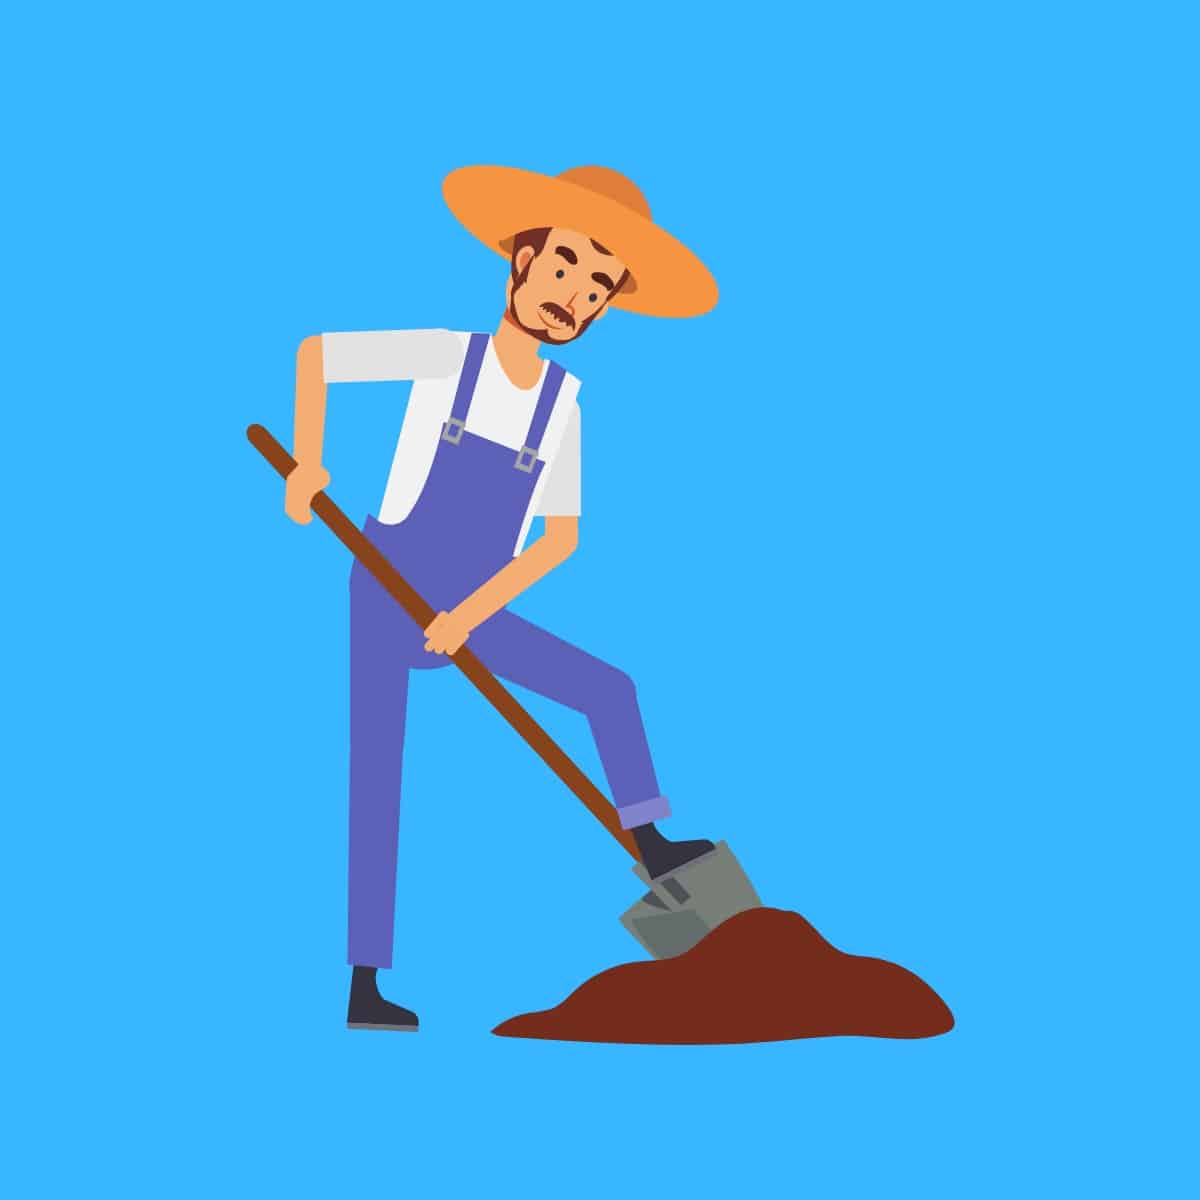 Cartoon graphic of a man digging dirt with a shovel on a blue background.